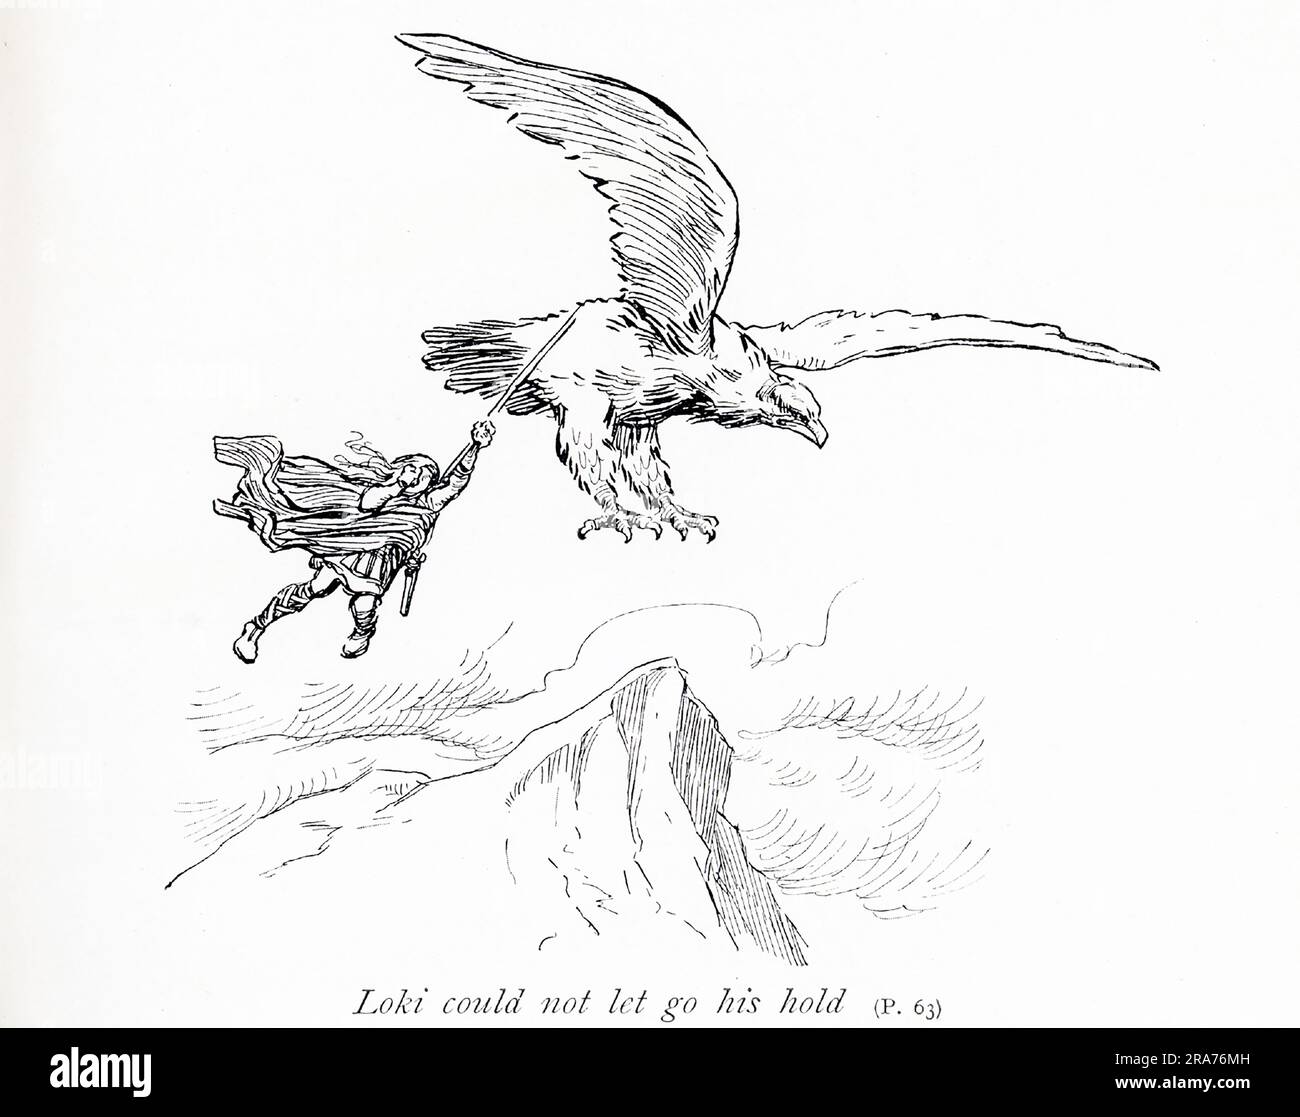 The early 1900s caption reads: Loki could not let go his hold' of the eagle. Loki is the personification/deity of mischief. He murdered Baldr, the god of joy and peace, and was punished by being bound to three slabs of stone with the entrails of his son Narfi. Stock Photo